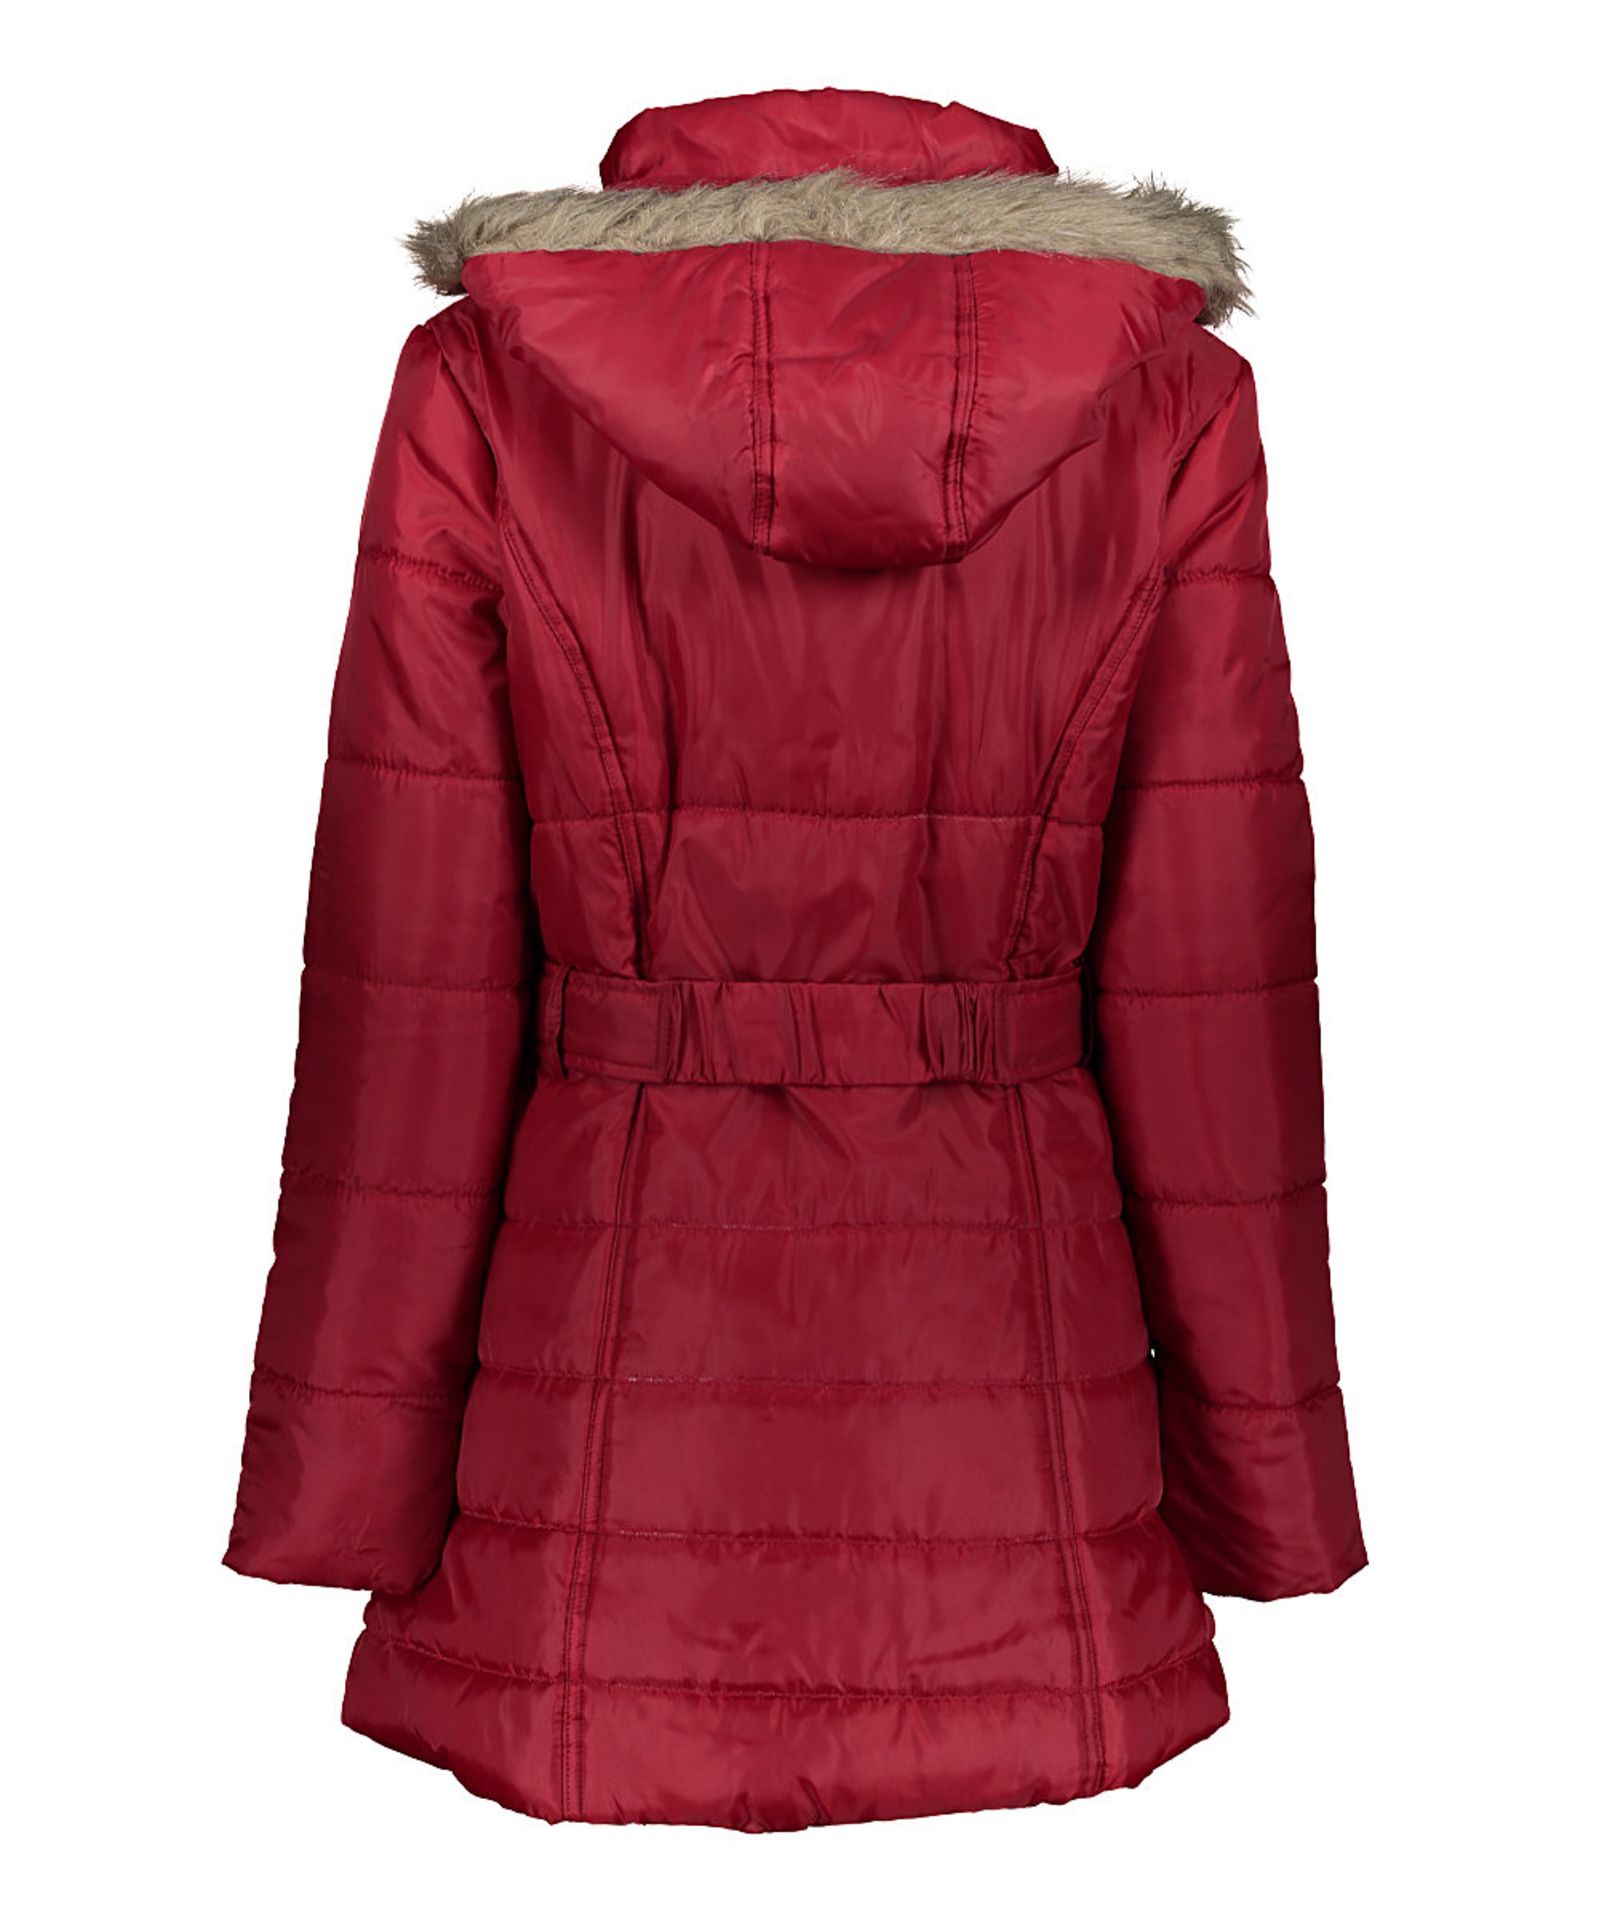 Red Toggle Puffer Coat (Us Size: S) [Ref: 39044319] - Image 2 of 2